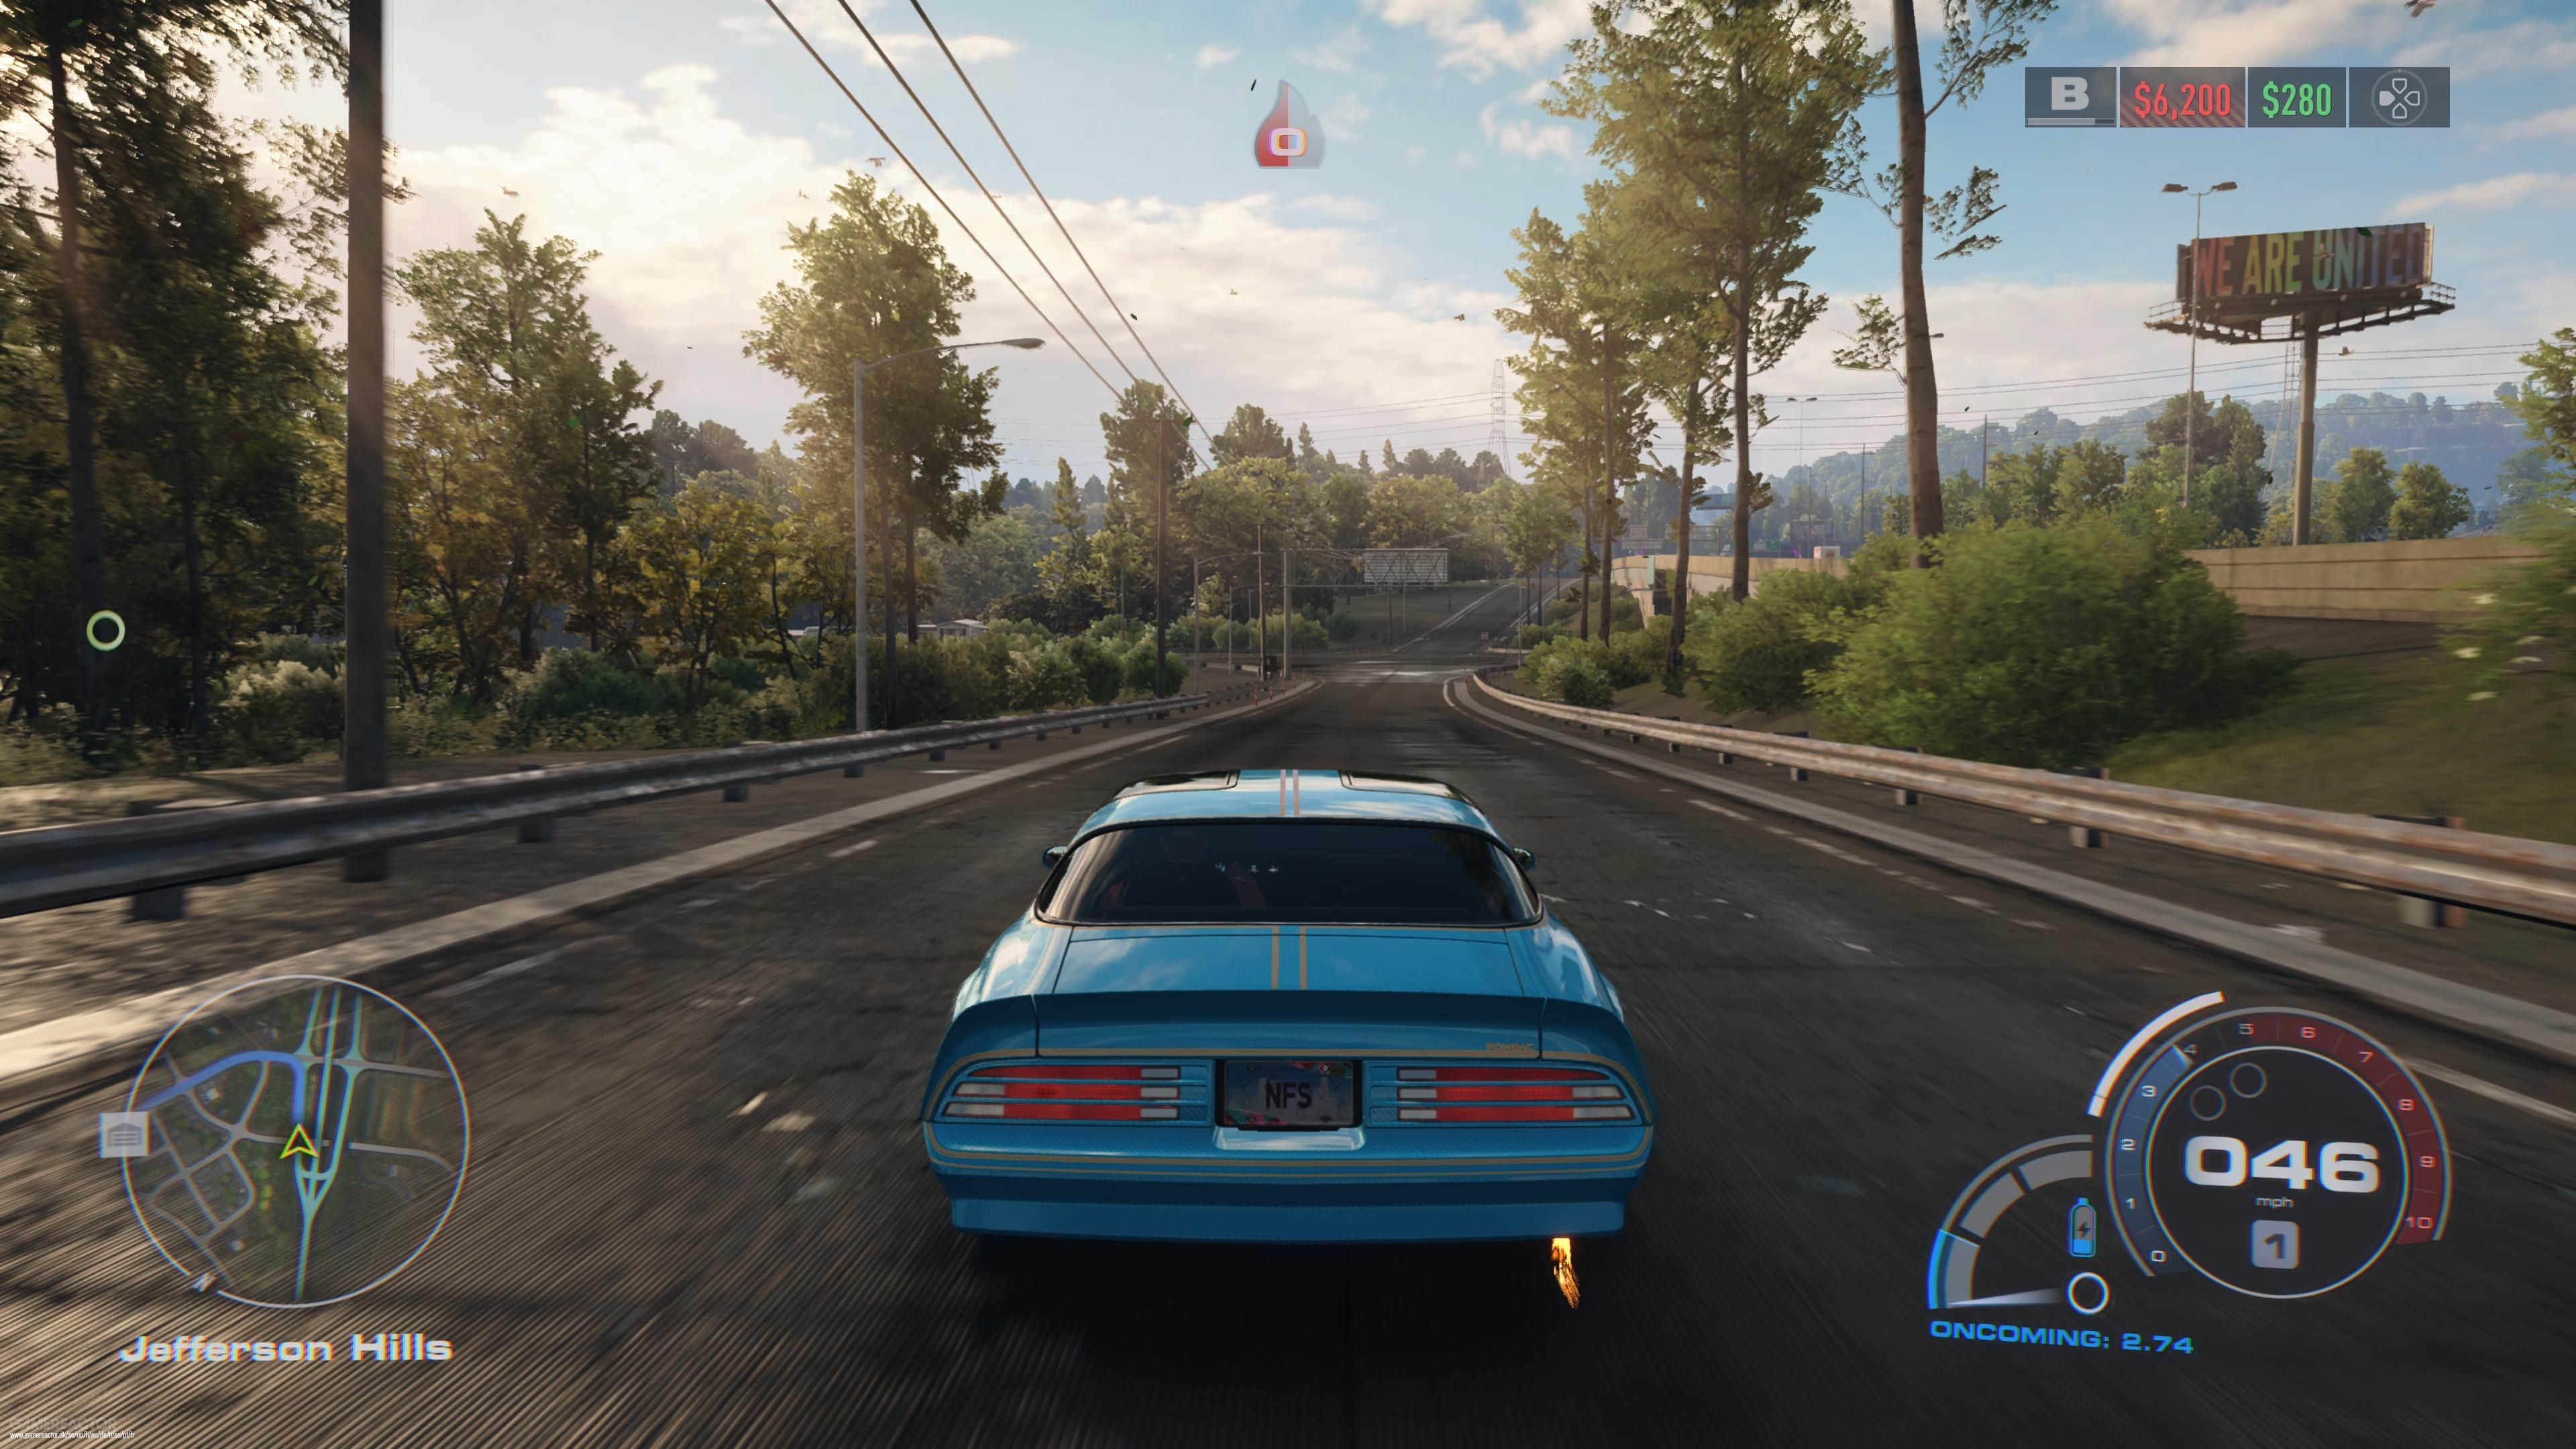 JOGO PS5 NEED FOR SPEED UNBOUND